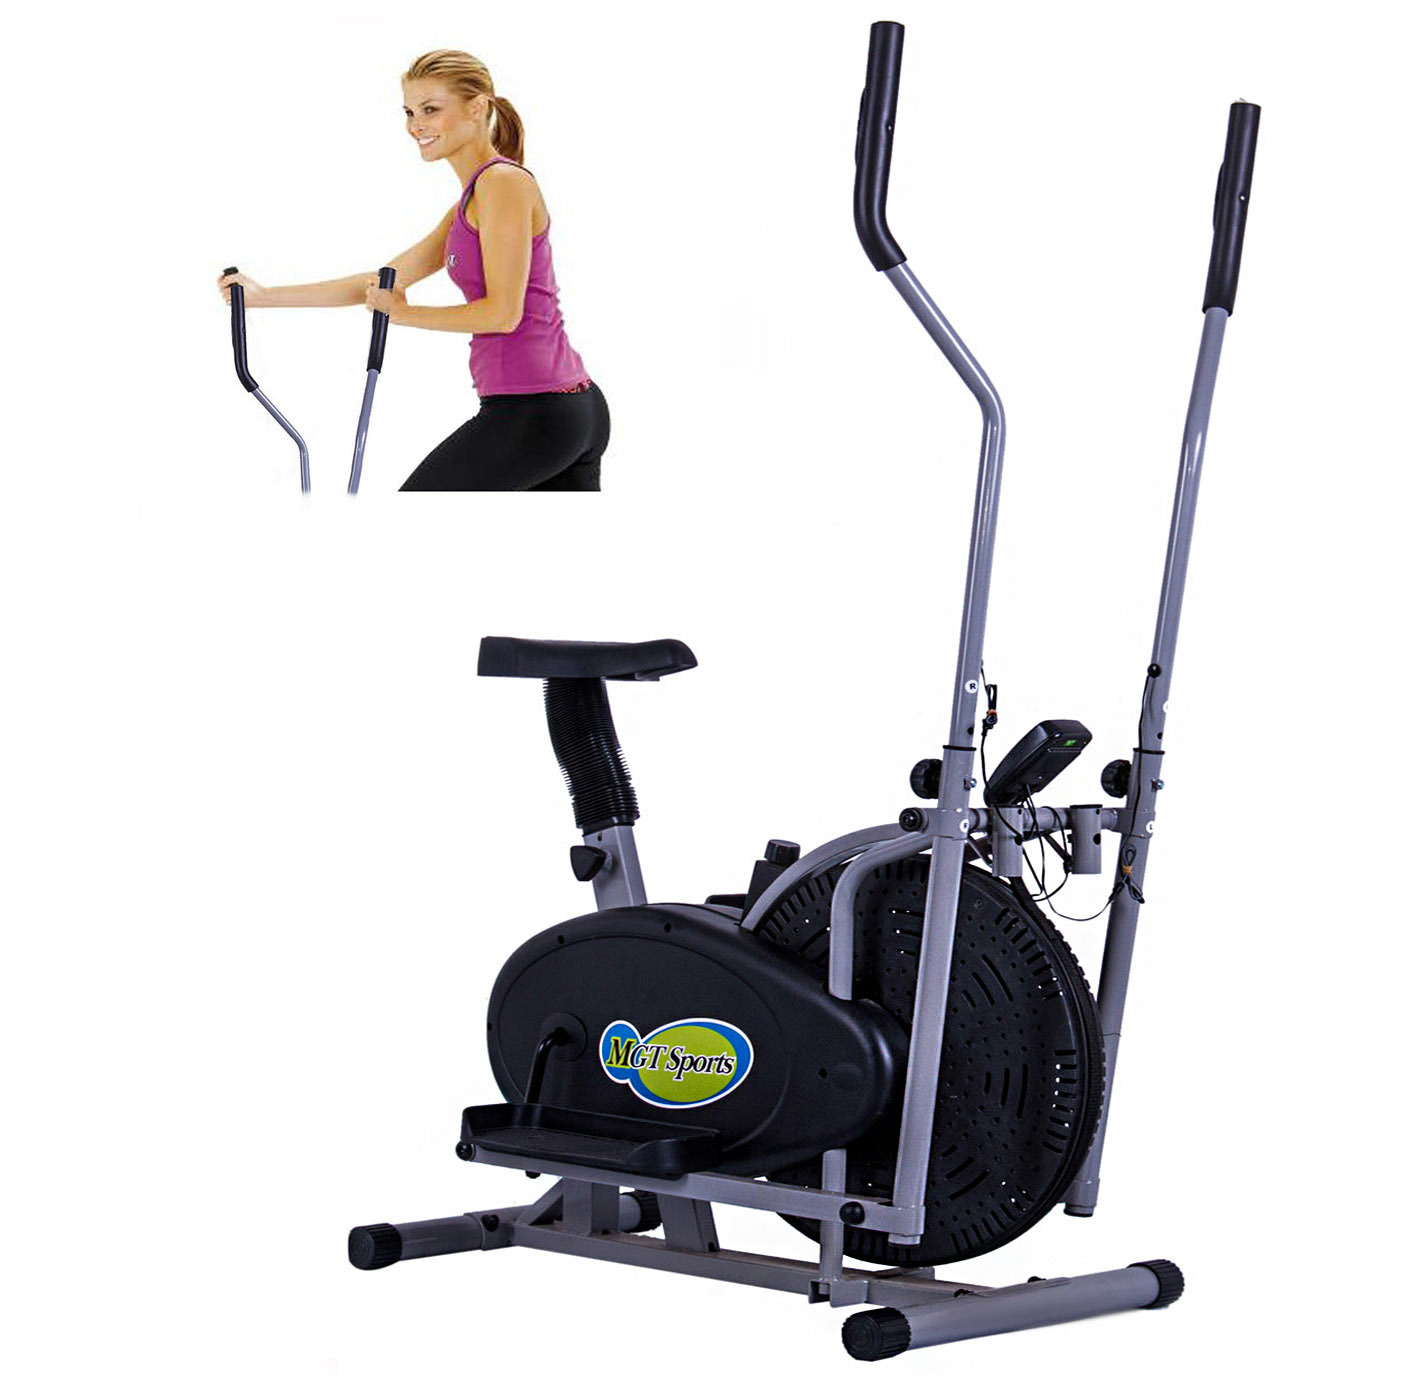 Fitplus All-in-one Elliptical Cross Trainer and Exercise Bike 